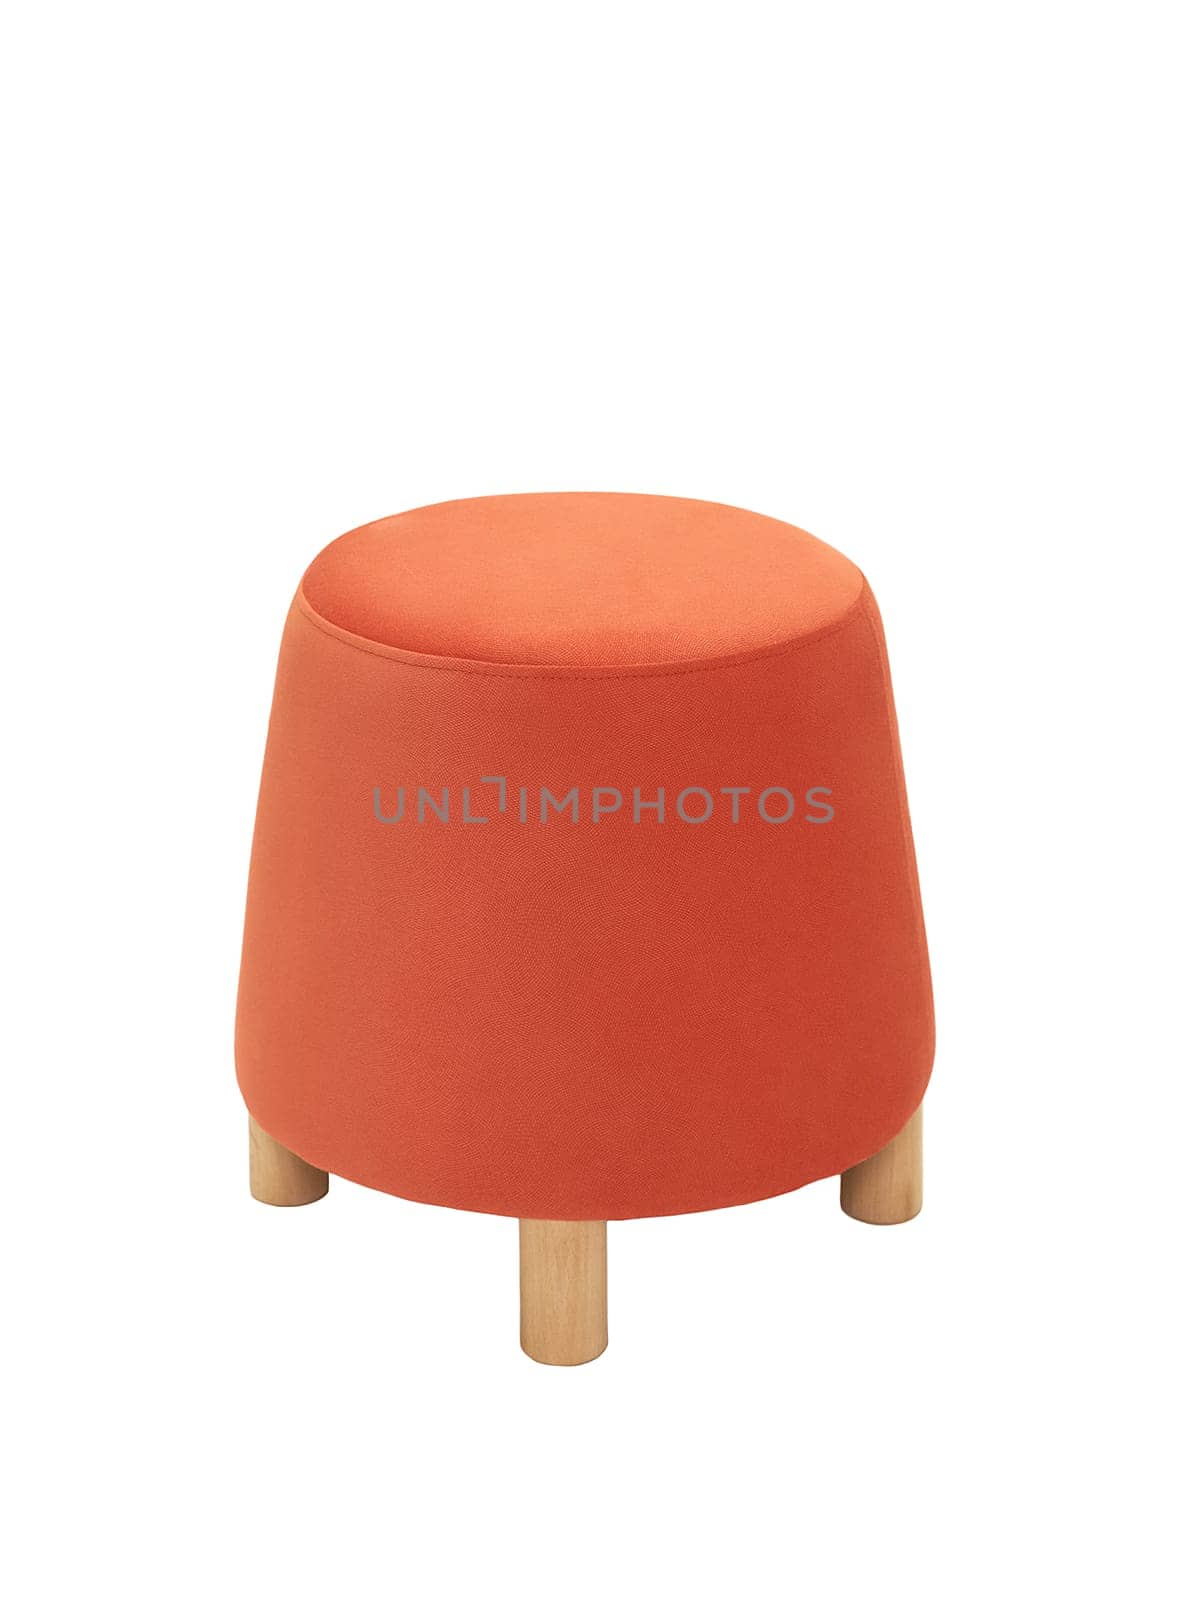 unusual modern orange conical padded stool upholstered with soft fabric in strict style isolated on white background. Creative approach to making furniture in shape of truncated cone